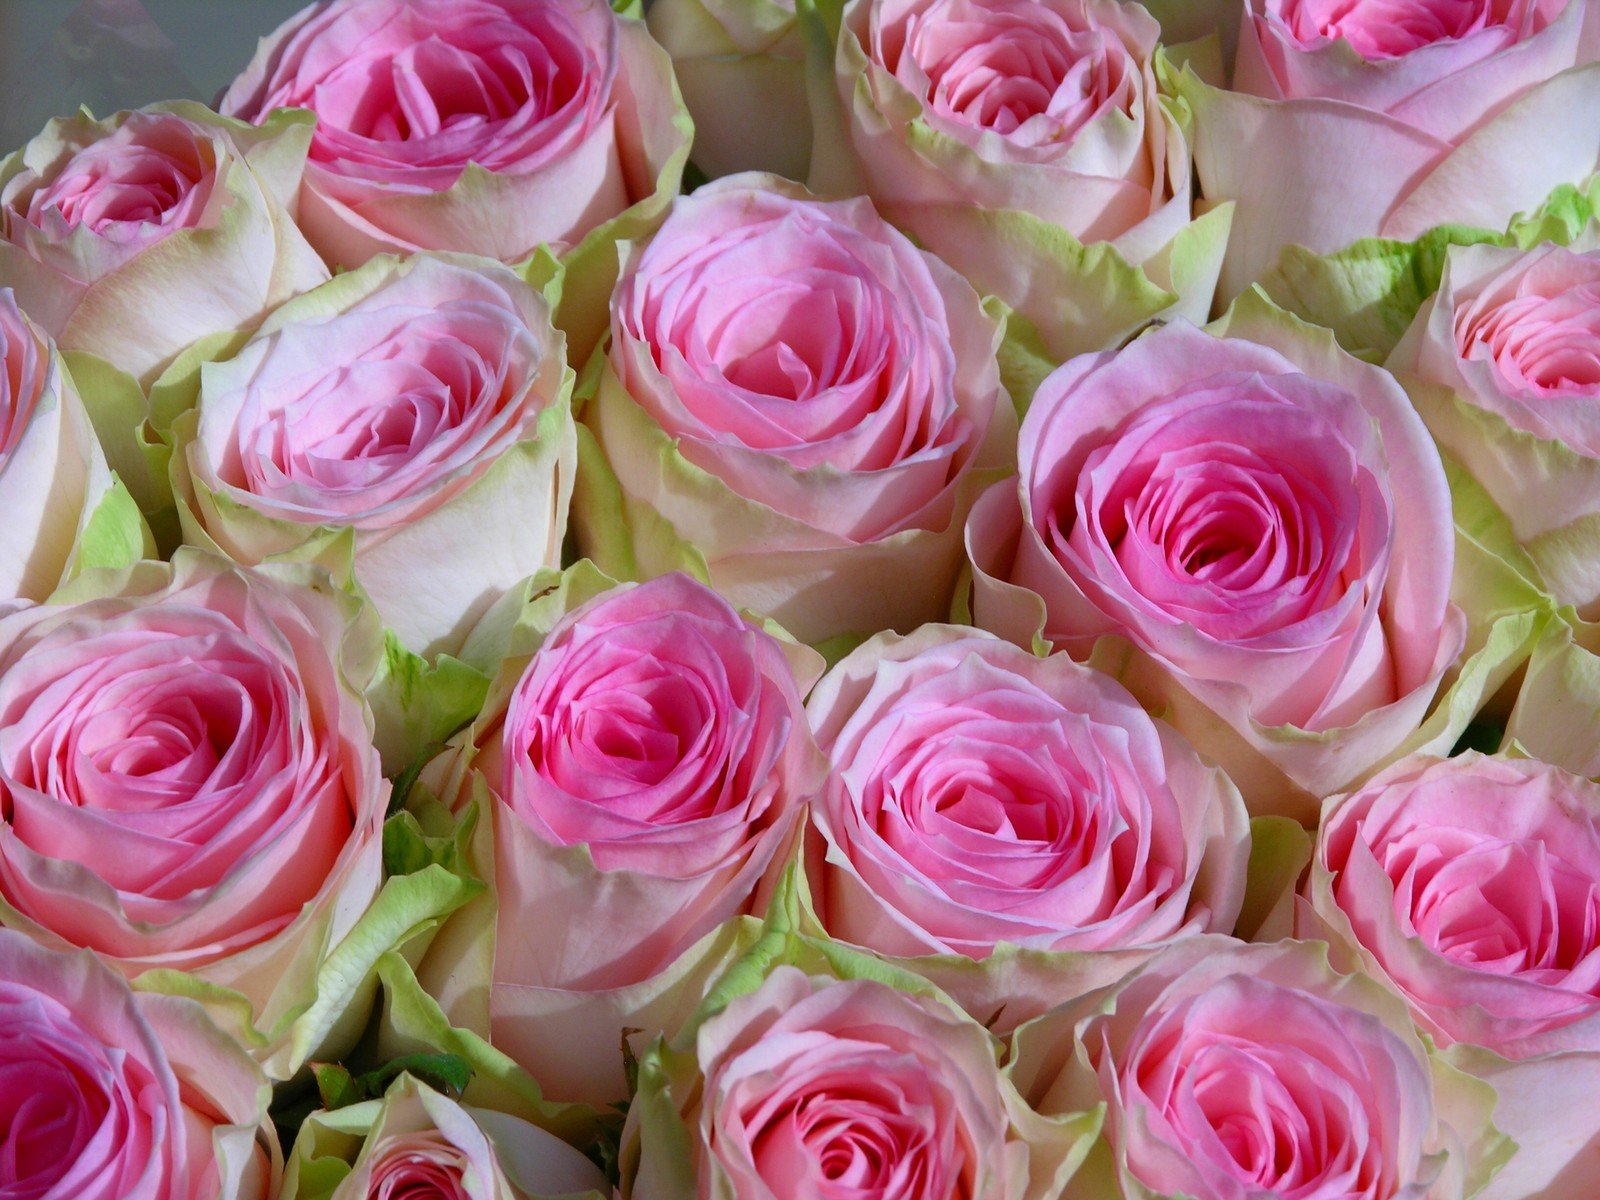 close up view of flowers with pink centers